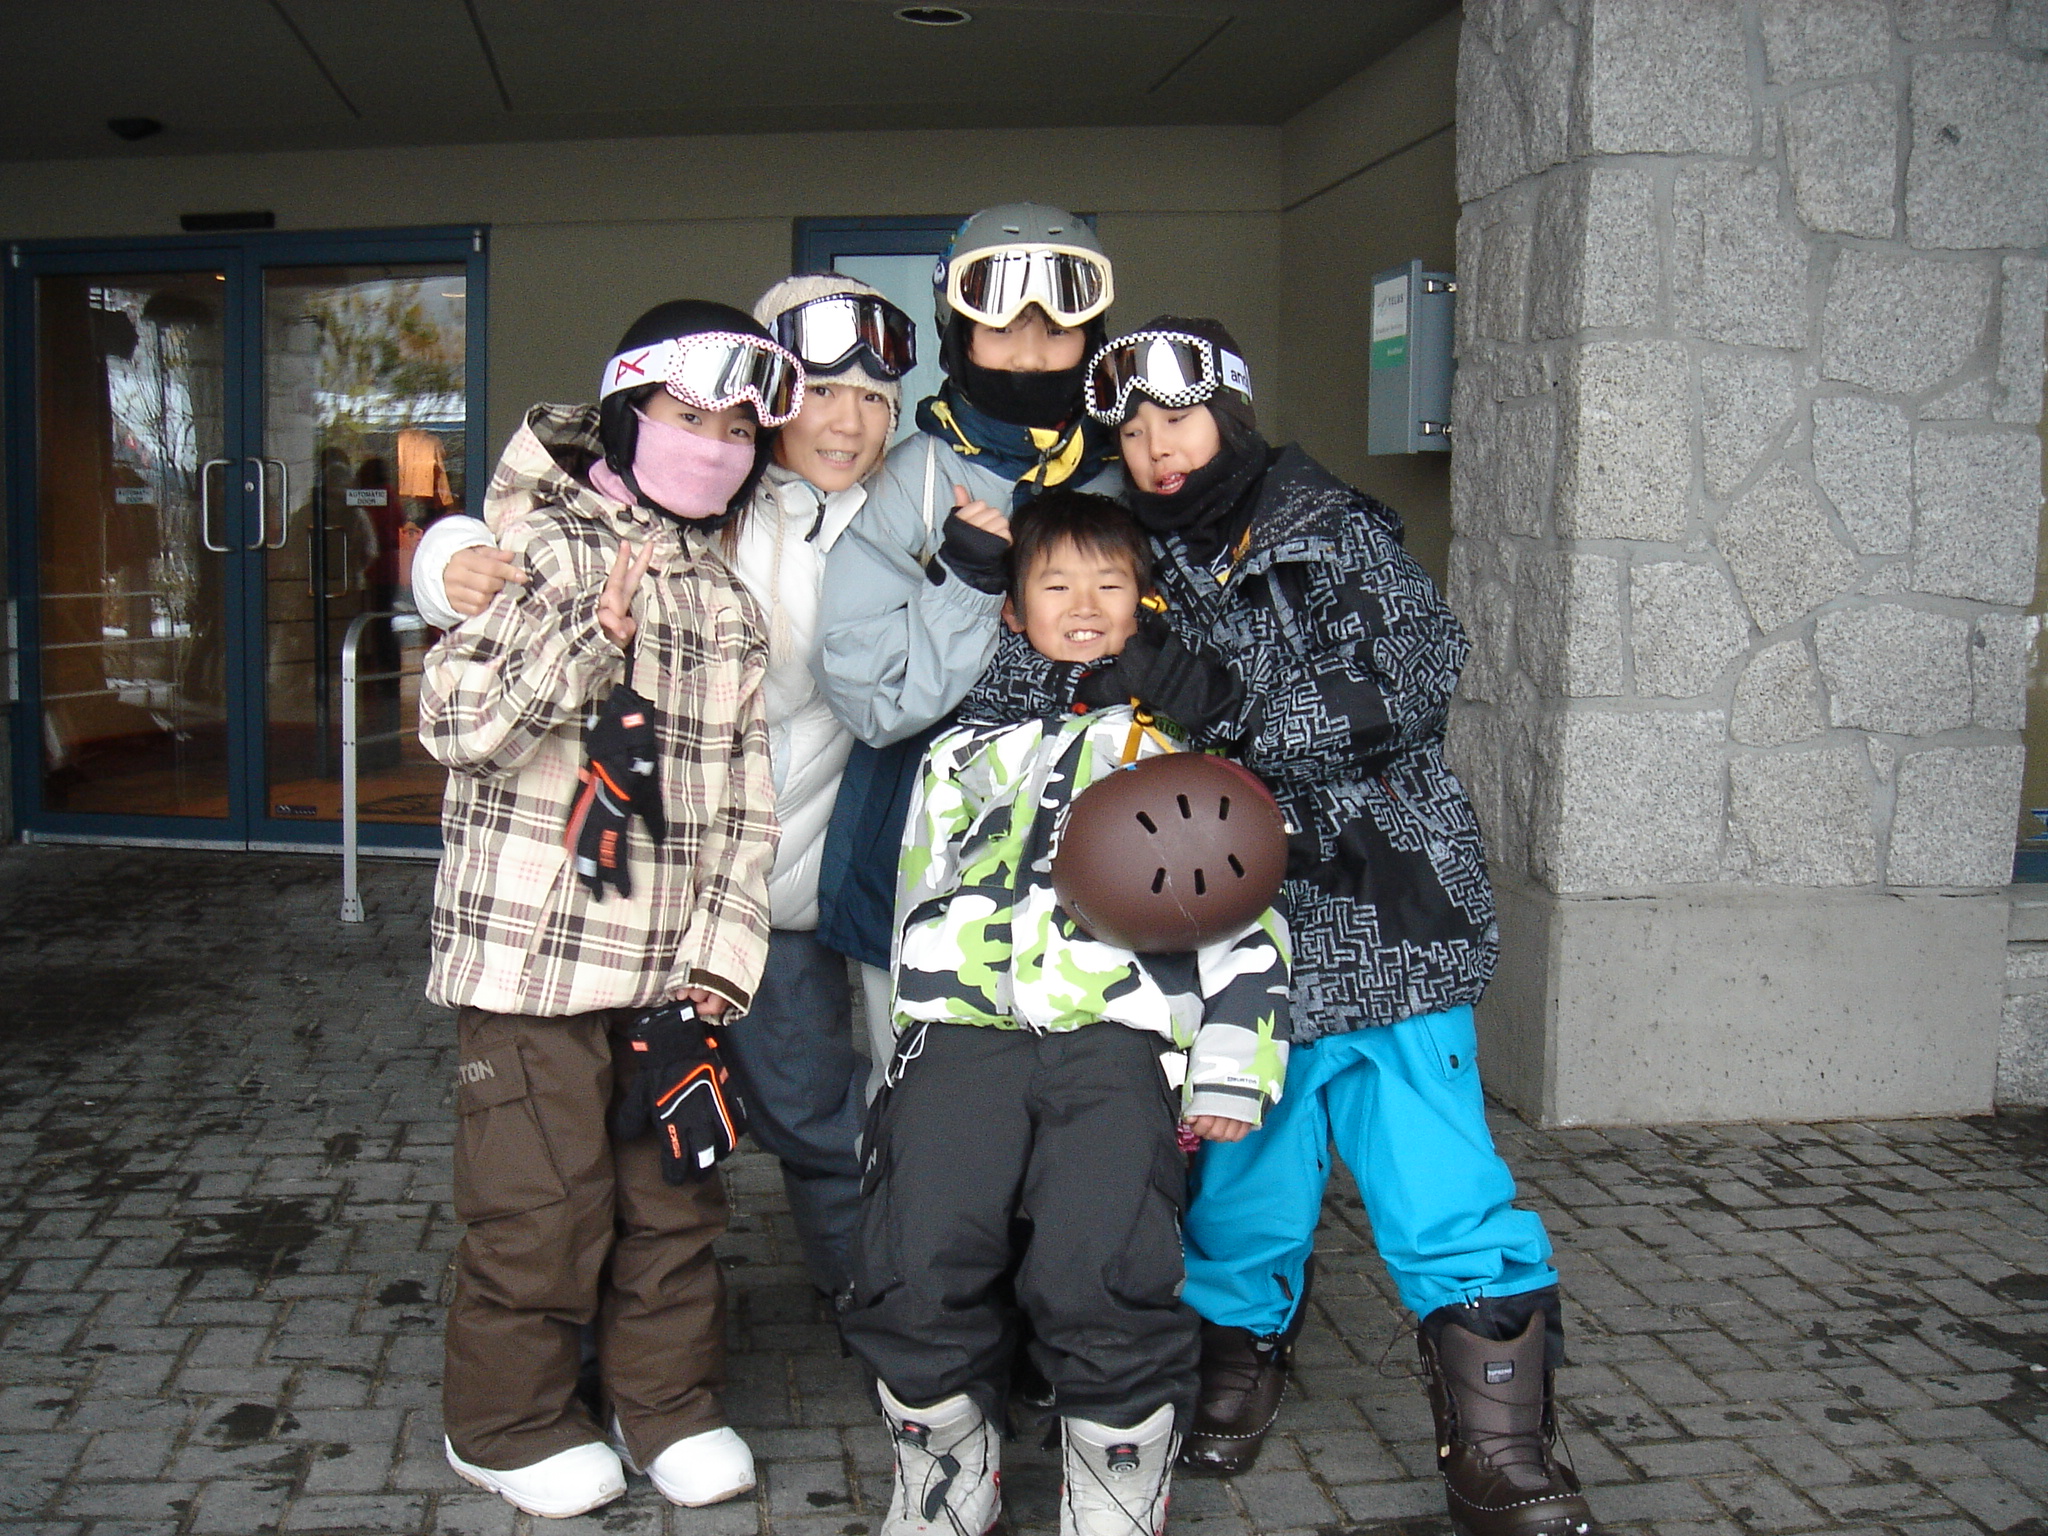 KIRARA has an environment that makes children independent through snowboarding, and it also became an opportunity to make various connections.